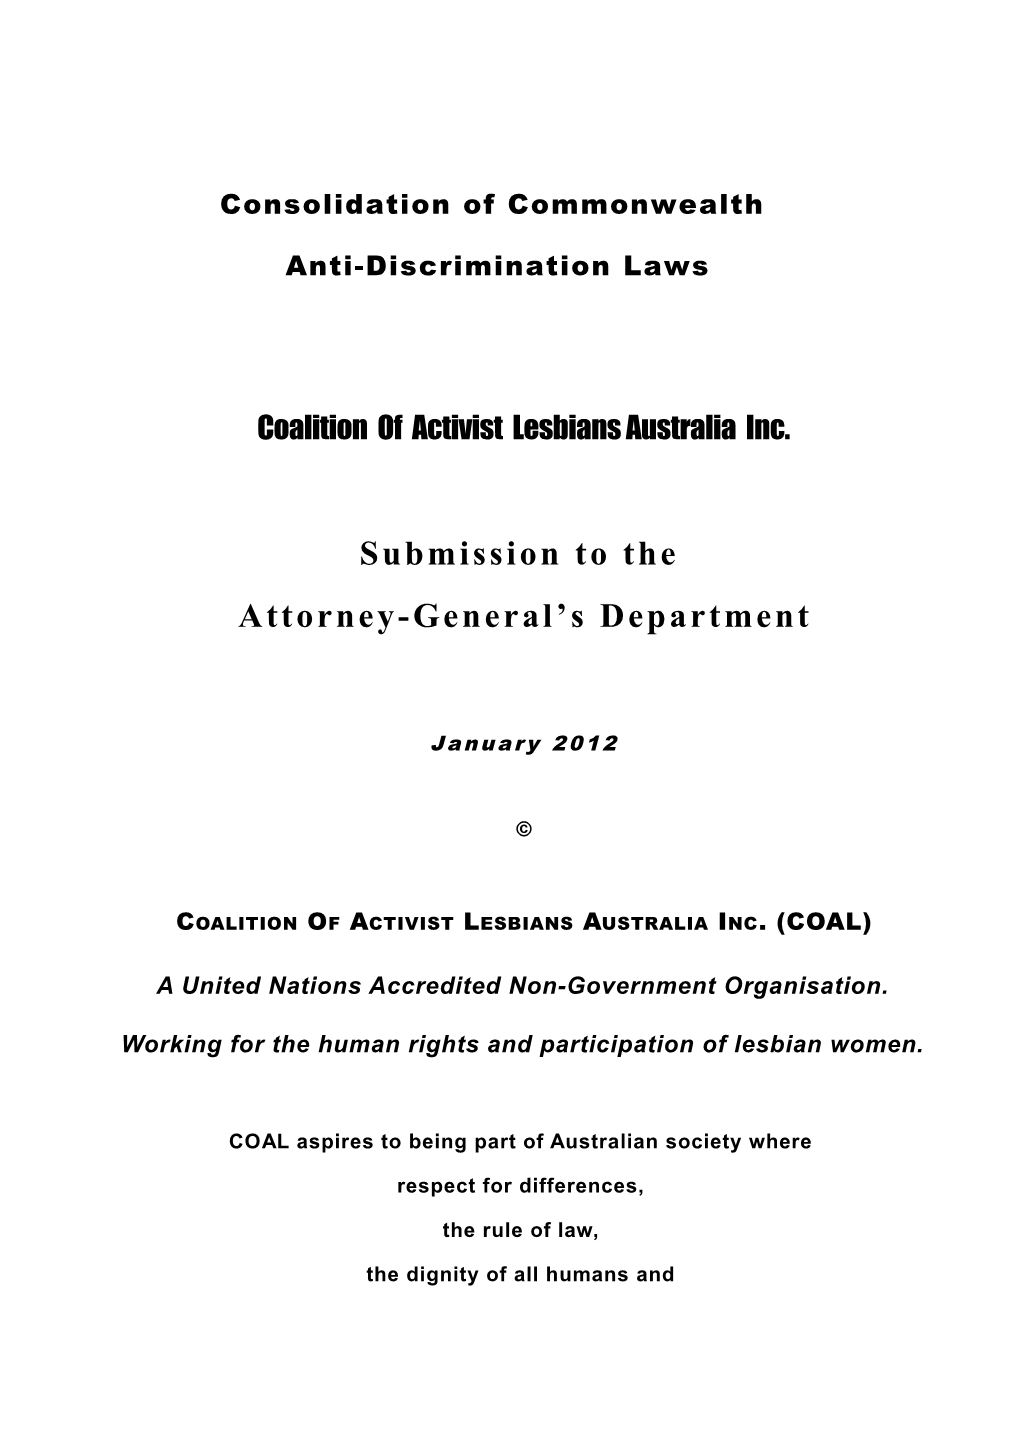 Submission on the Consolidation of Commonwealth Anti-Discrimination Laws - Coalition Of